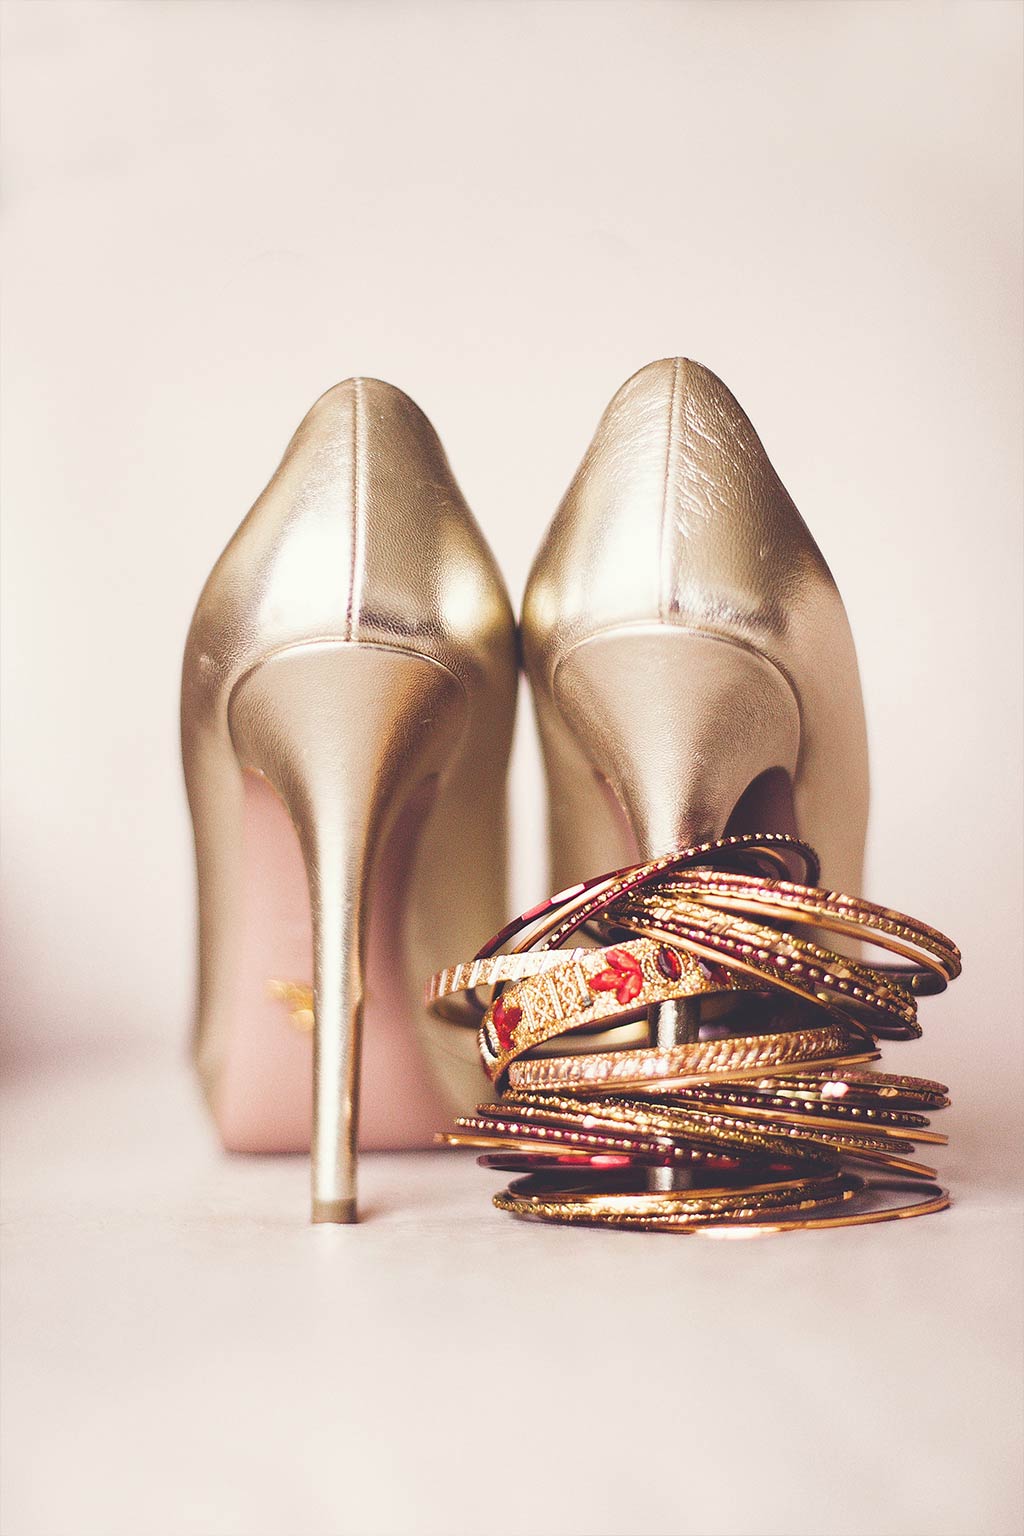 Shoes and Bangles